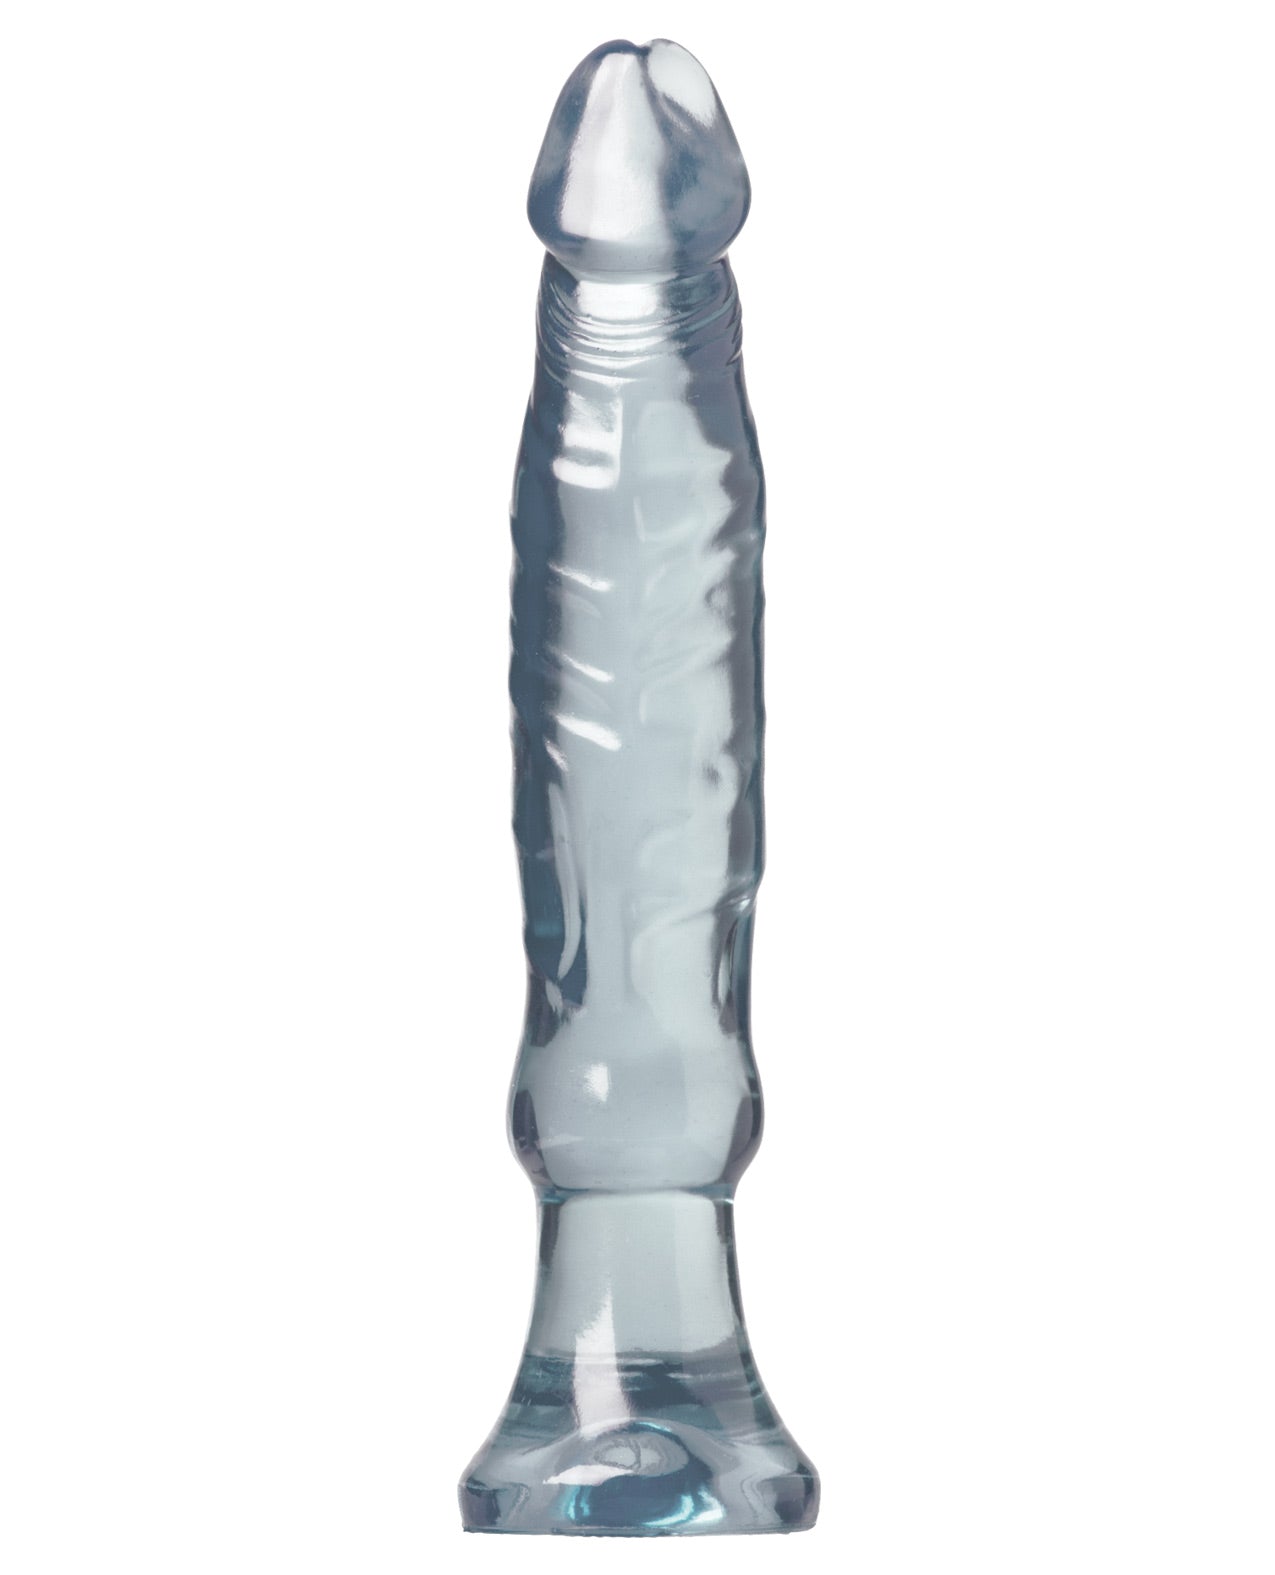 Crystal Jellies 6" Anal Starter - Clear - LUST Depot